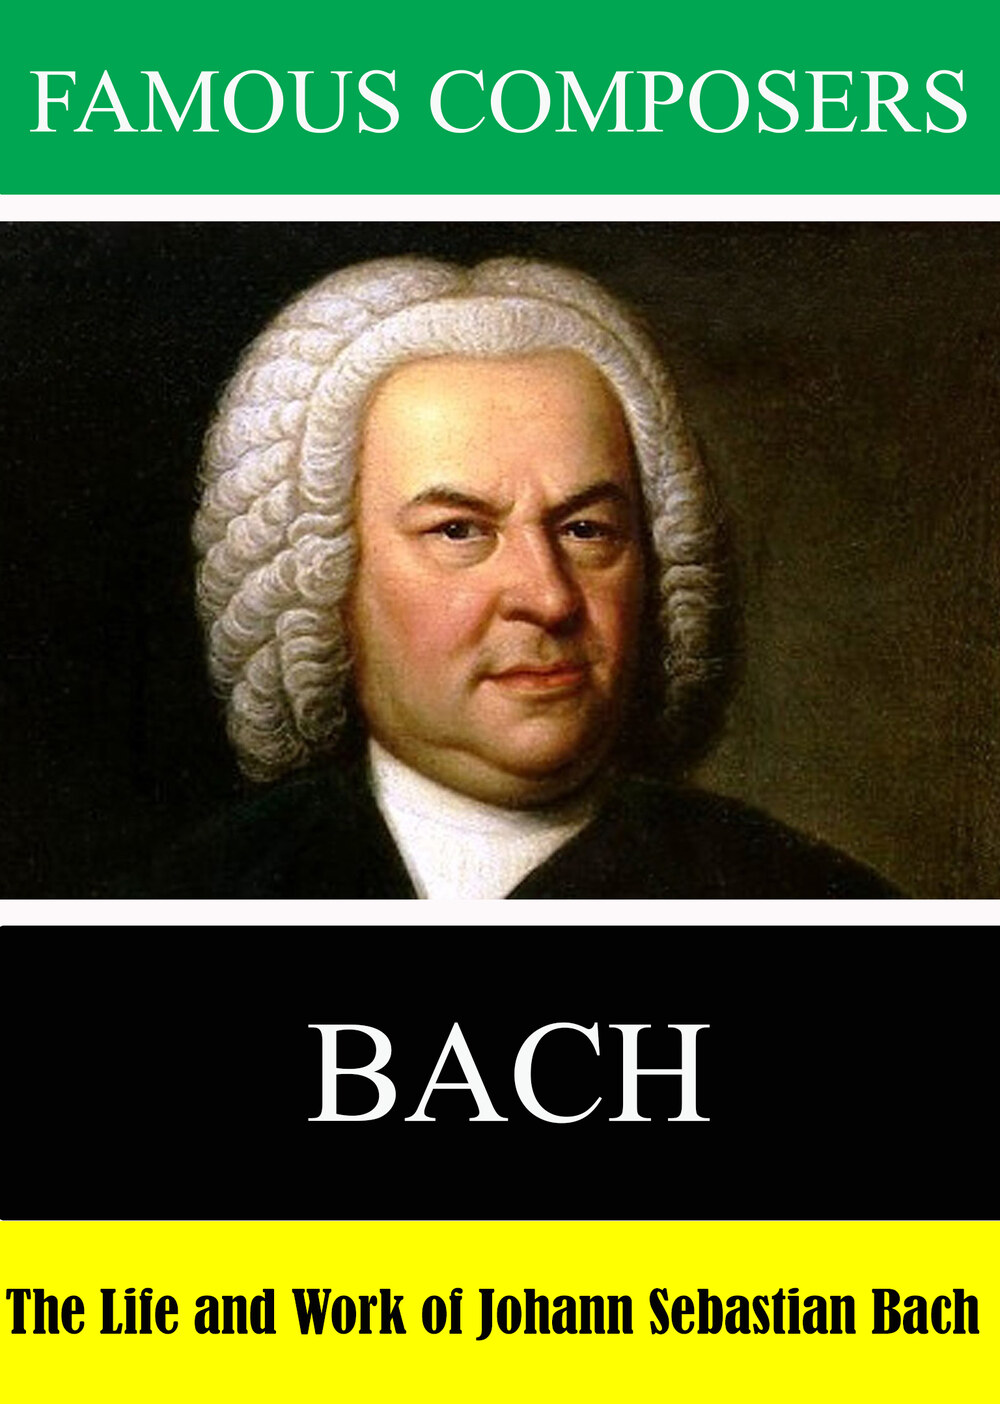 L7917 - Famous Composers: The Life and Work of Johann Sebastian Bach